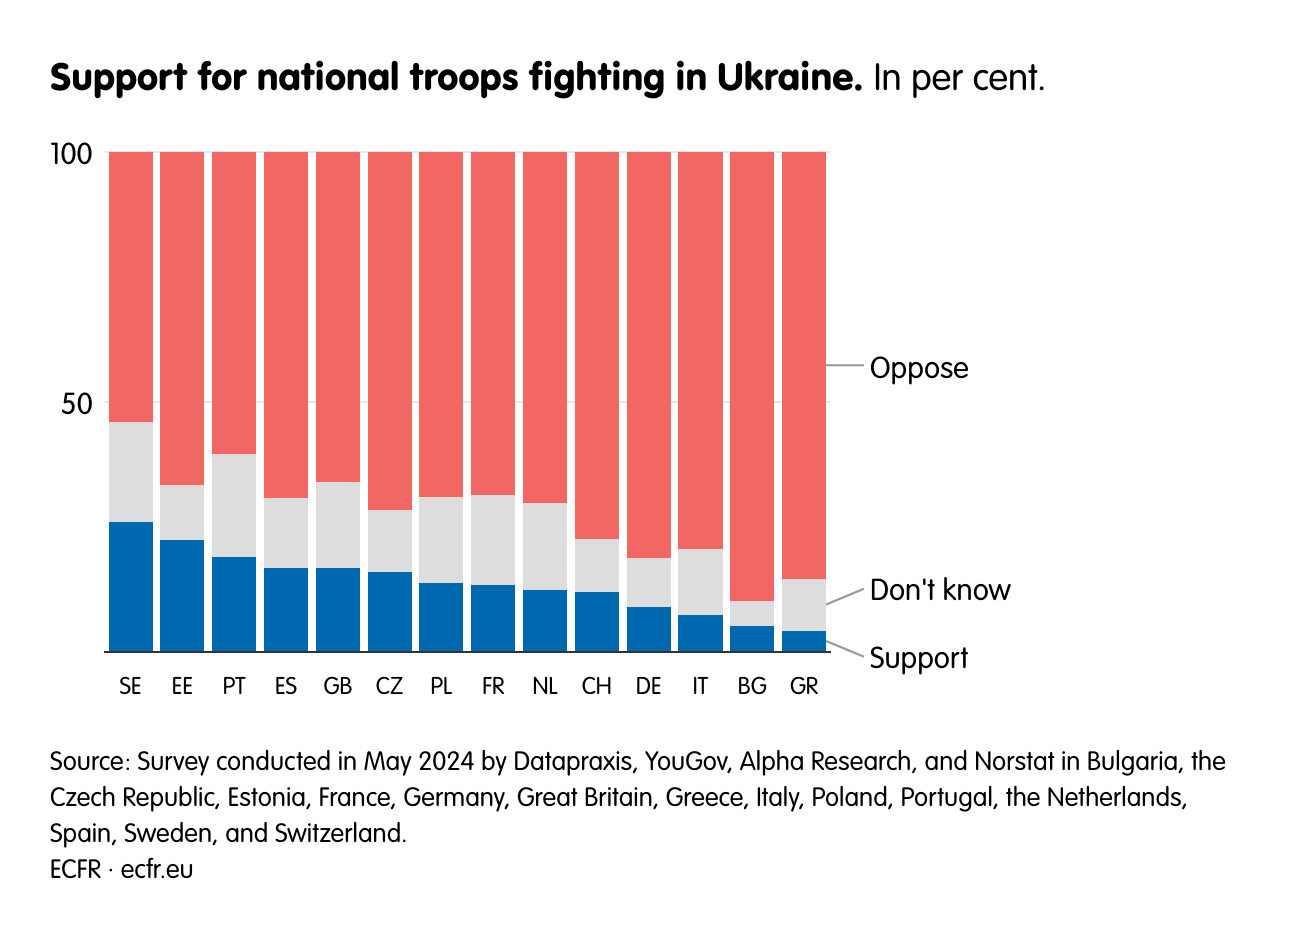 Support for national troops fighting in Ukraine.